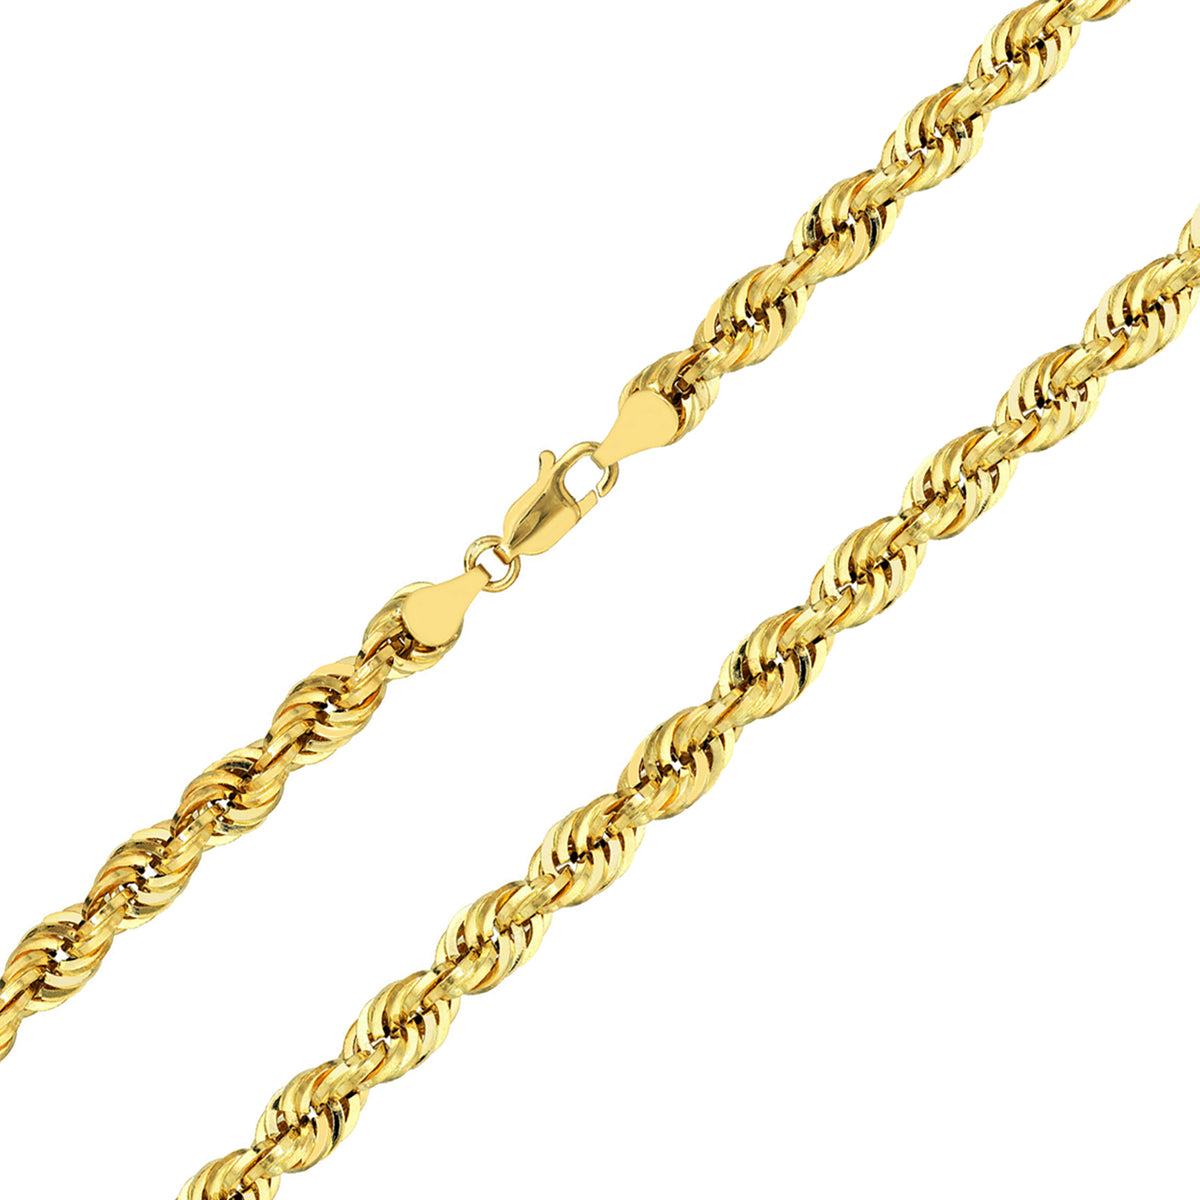 14k Yellow Gold Hollow 5mm Rope Chain Necklace with Lobster Lock - Light Rope Chain with Diamond Cut